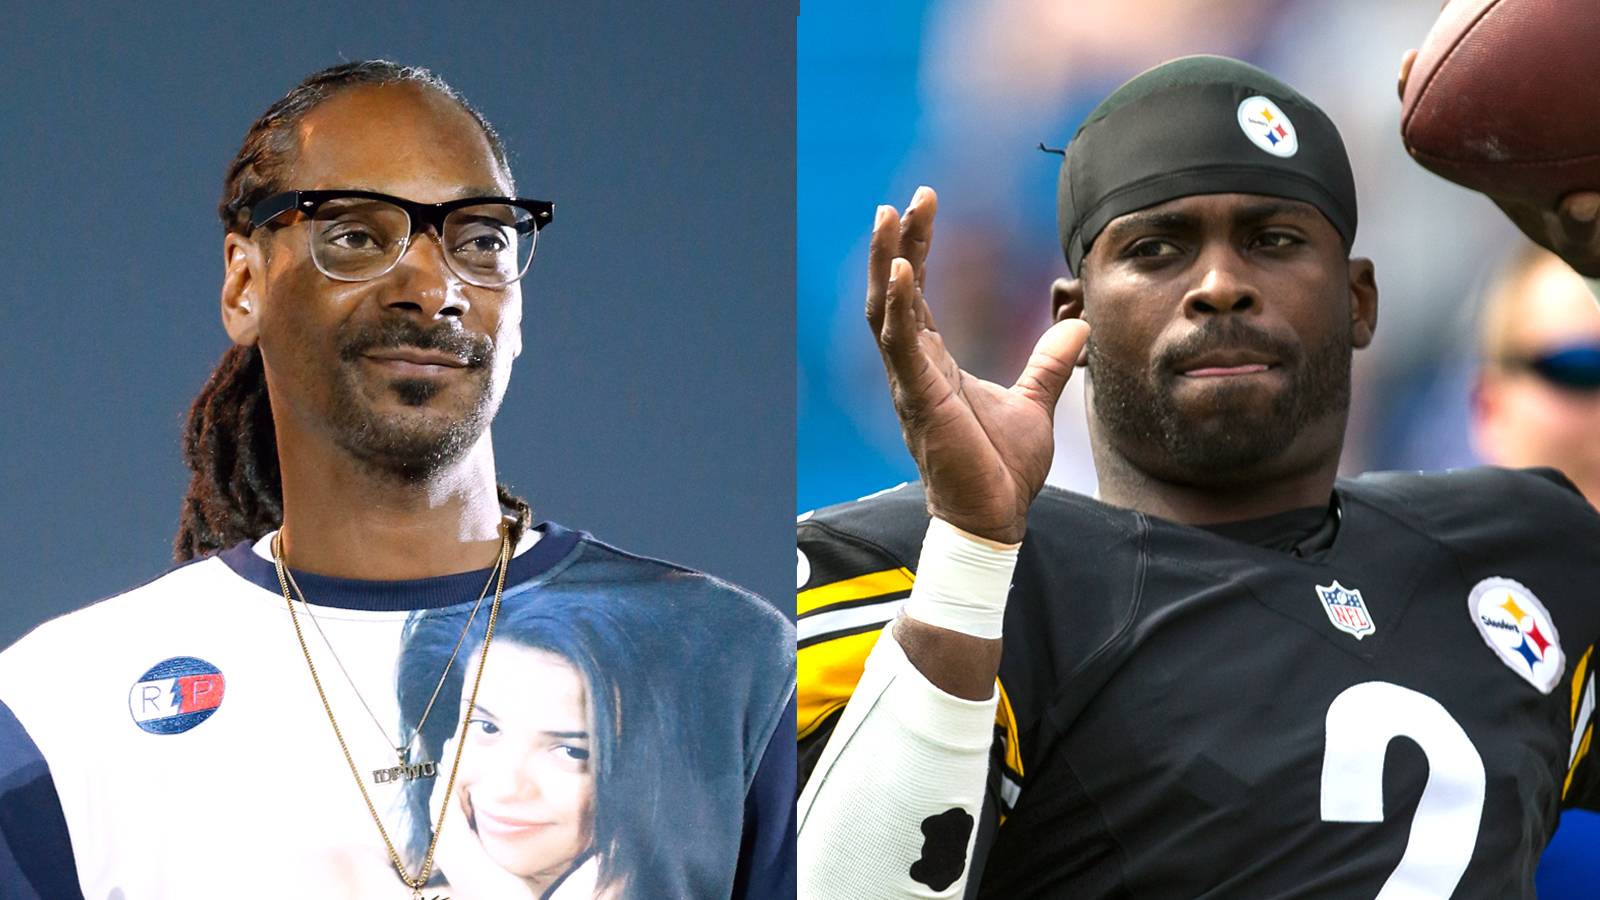 Snoop Dogg Says Leave Michael Vick Alone About His Dogfighting Past